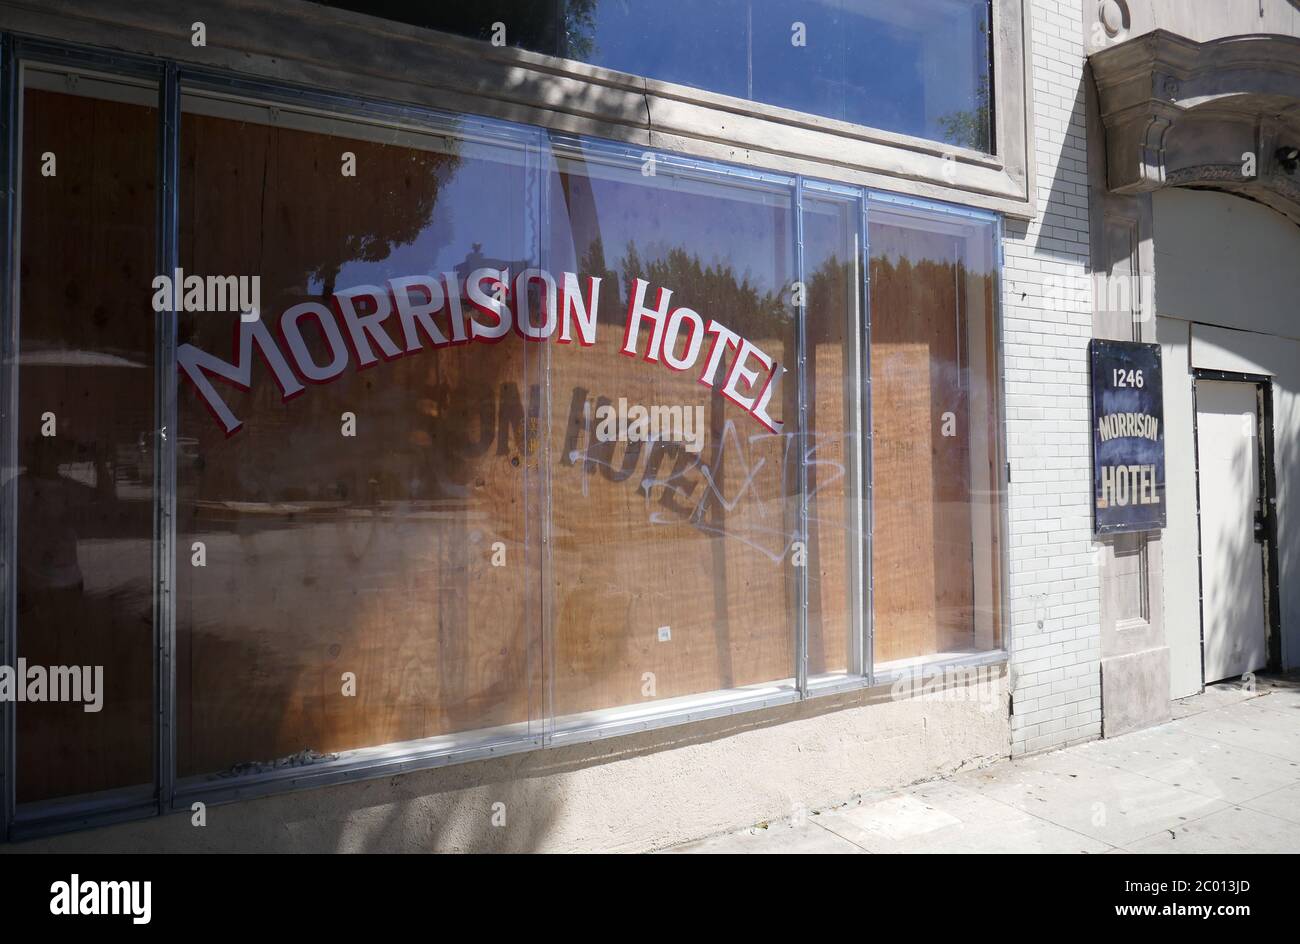 Los Angeles, California, USA 10th June 2020 A general view of The Morrison Hotel where Jim Morrison and the Doors did a photoshoot for their album cover at The Morrison Hotel at 1246 South Hope Street on June 10, 2020 in Hollywood, California, USA. Photo by Barry King/Alamy Stock Photo Stock Photo